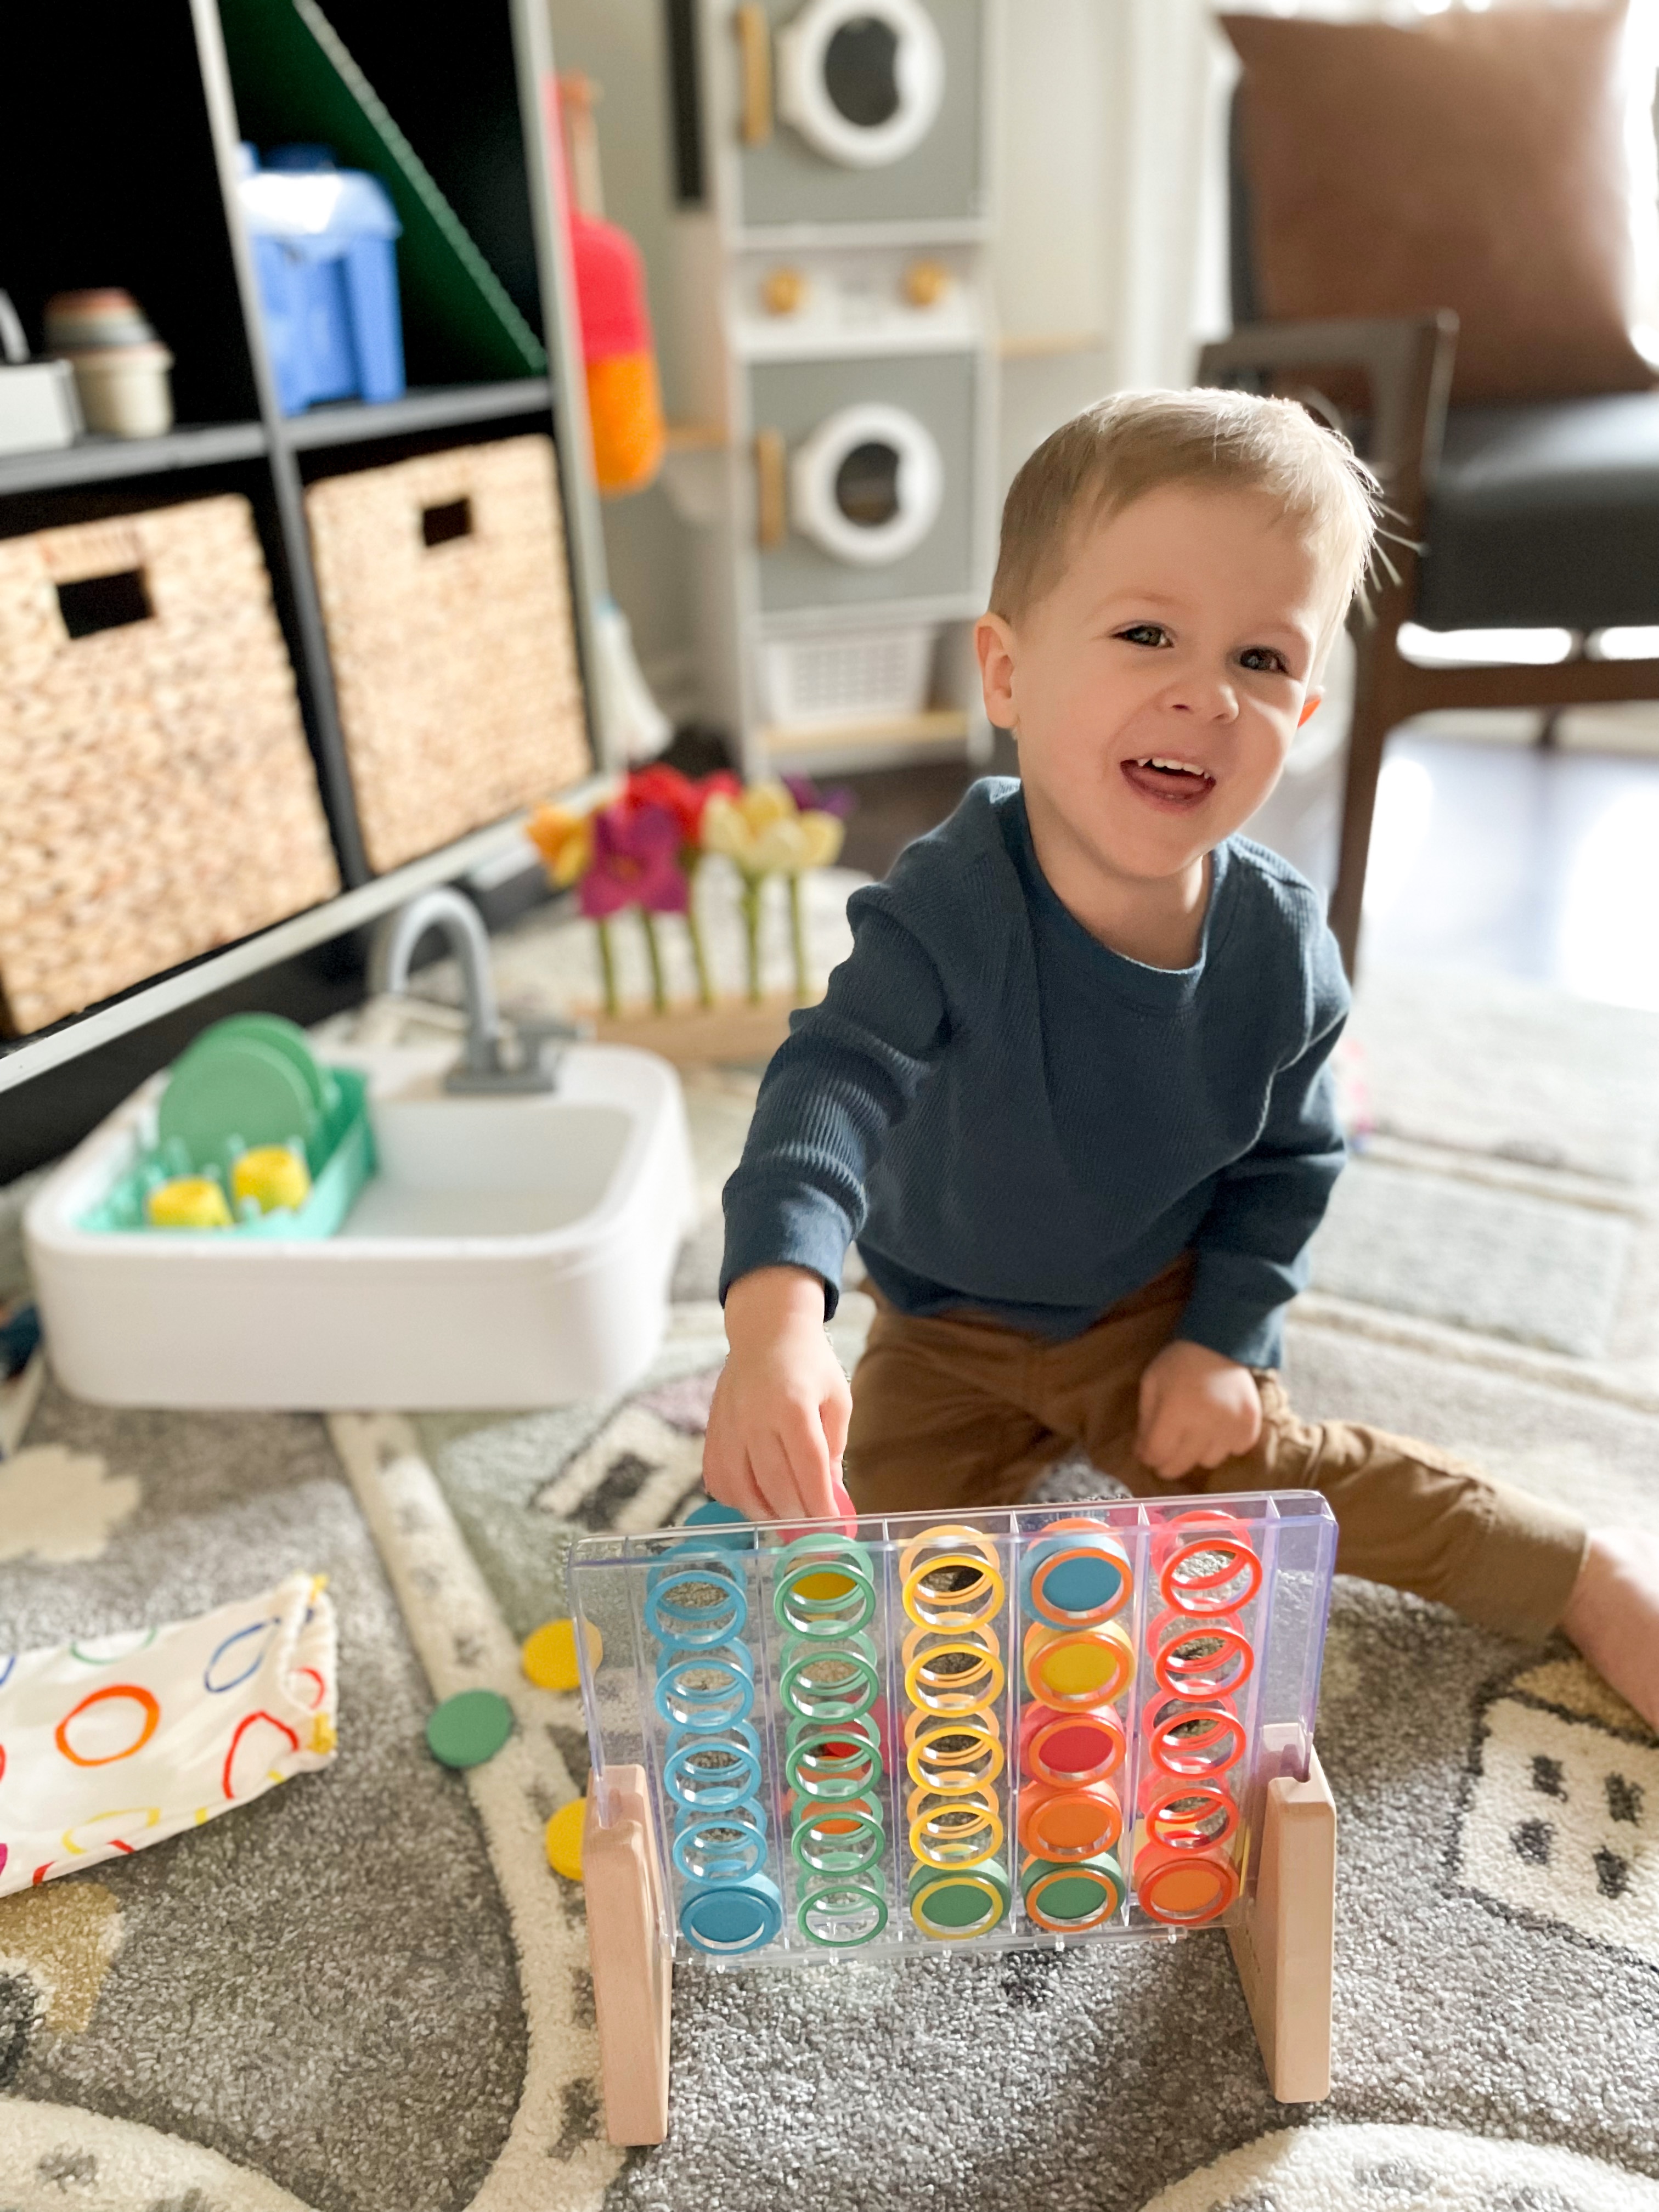 Lovevery Play Kits Review: Best Subscription for Childrens' Toys